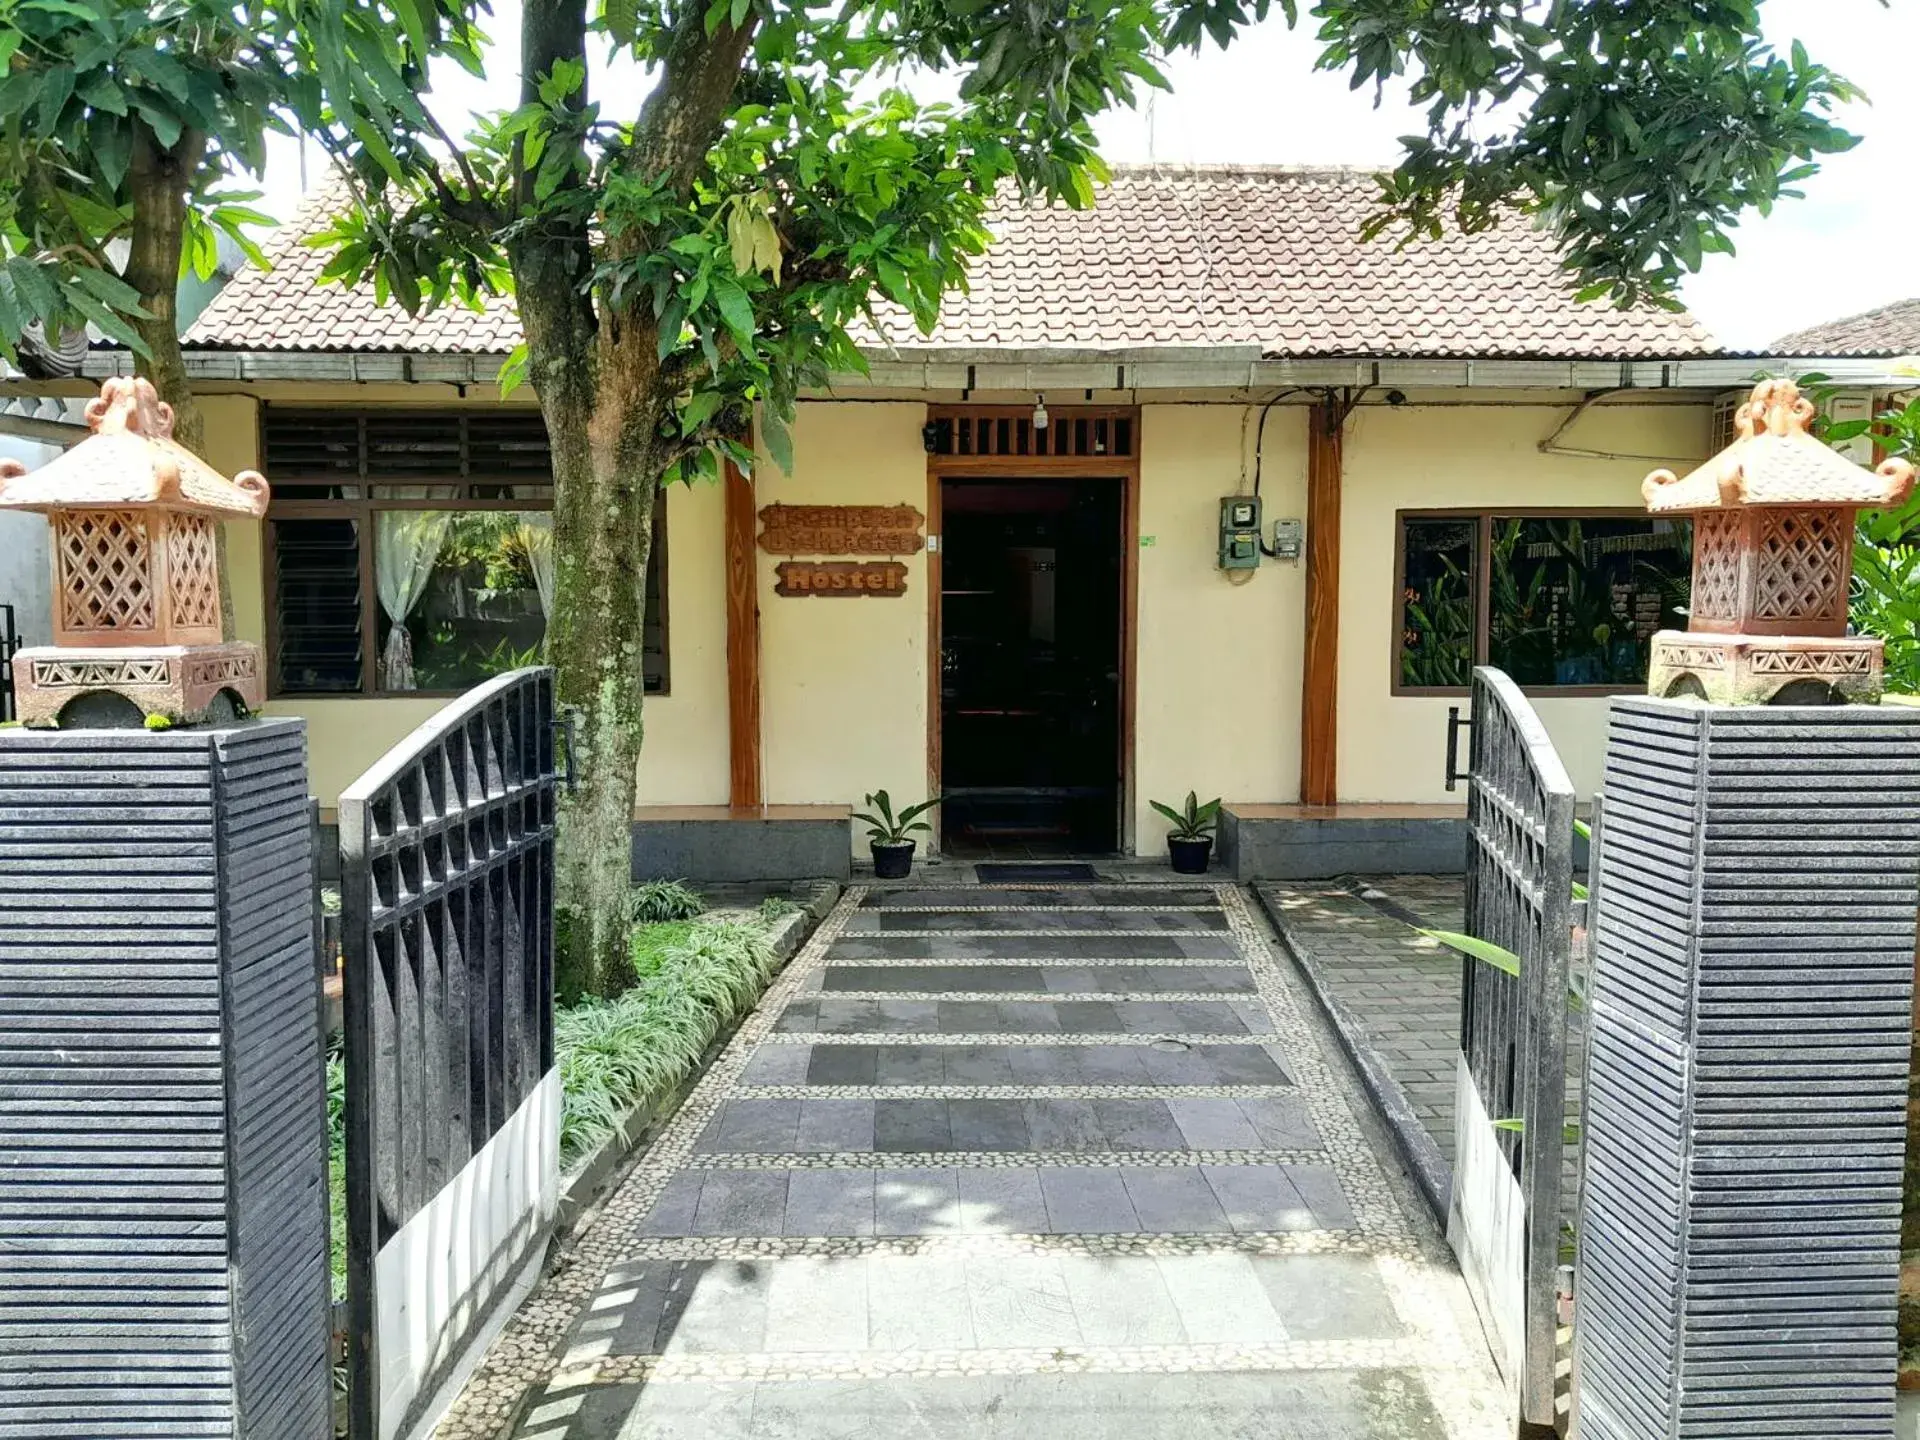 Property building in Ngampilan Backpacker Hostel